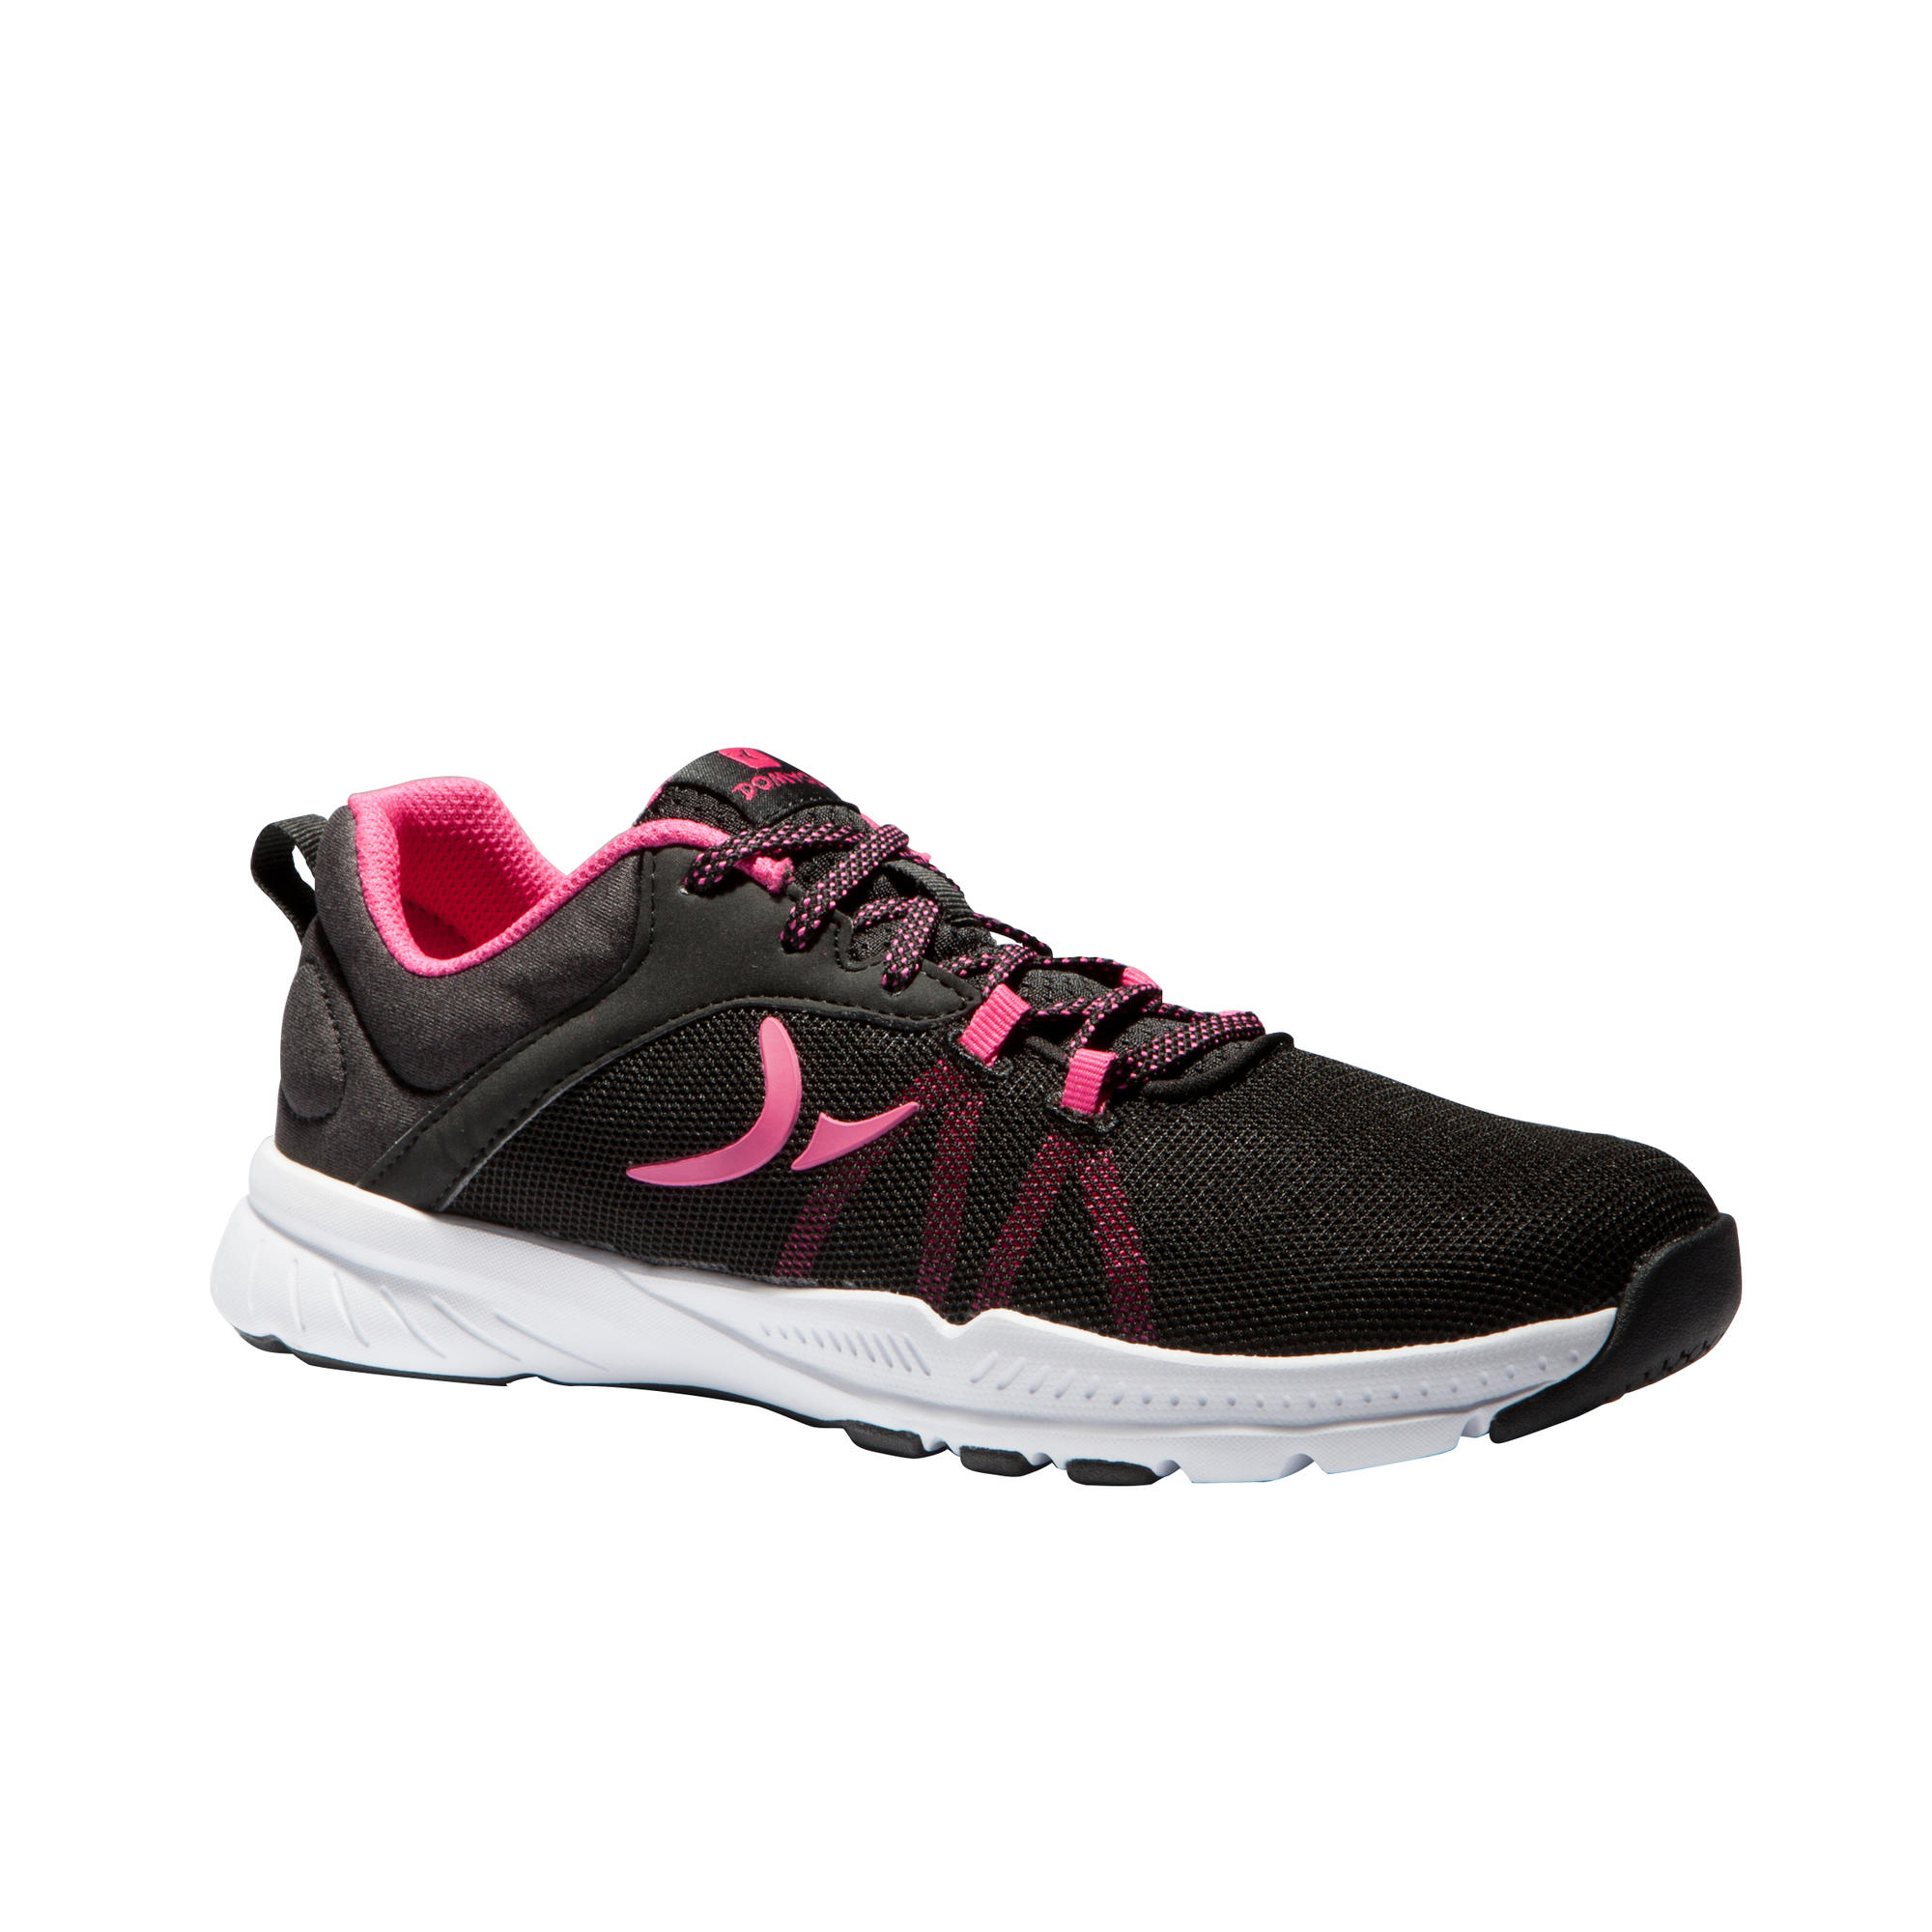 Cardio Fitness Shoes - Black/Pink 